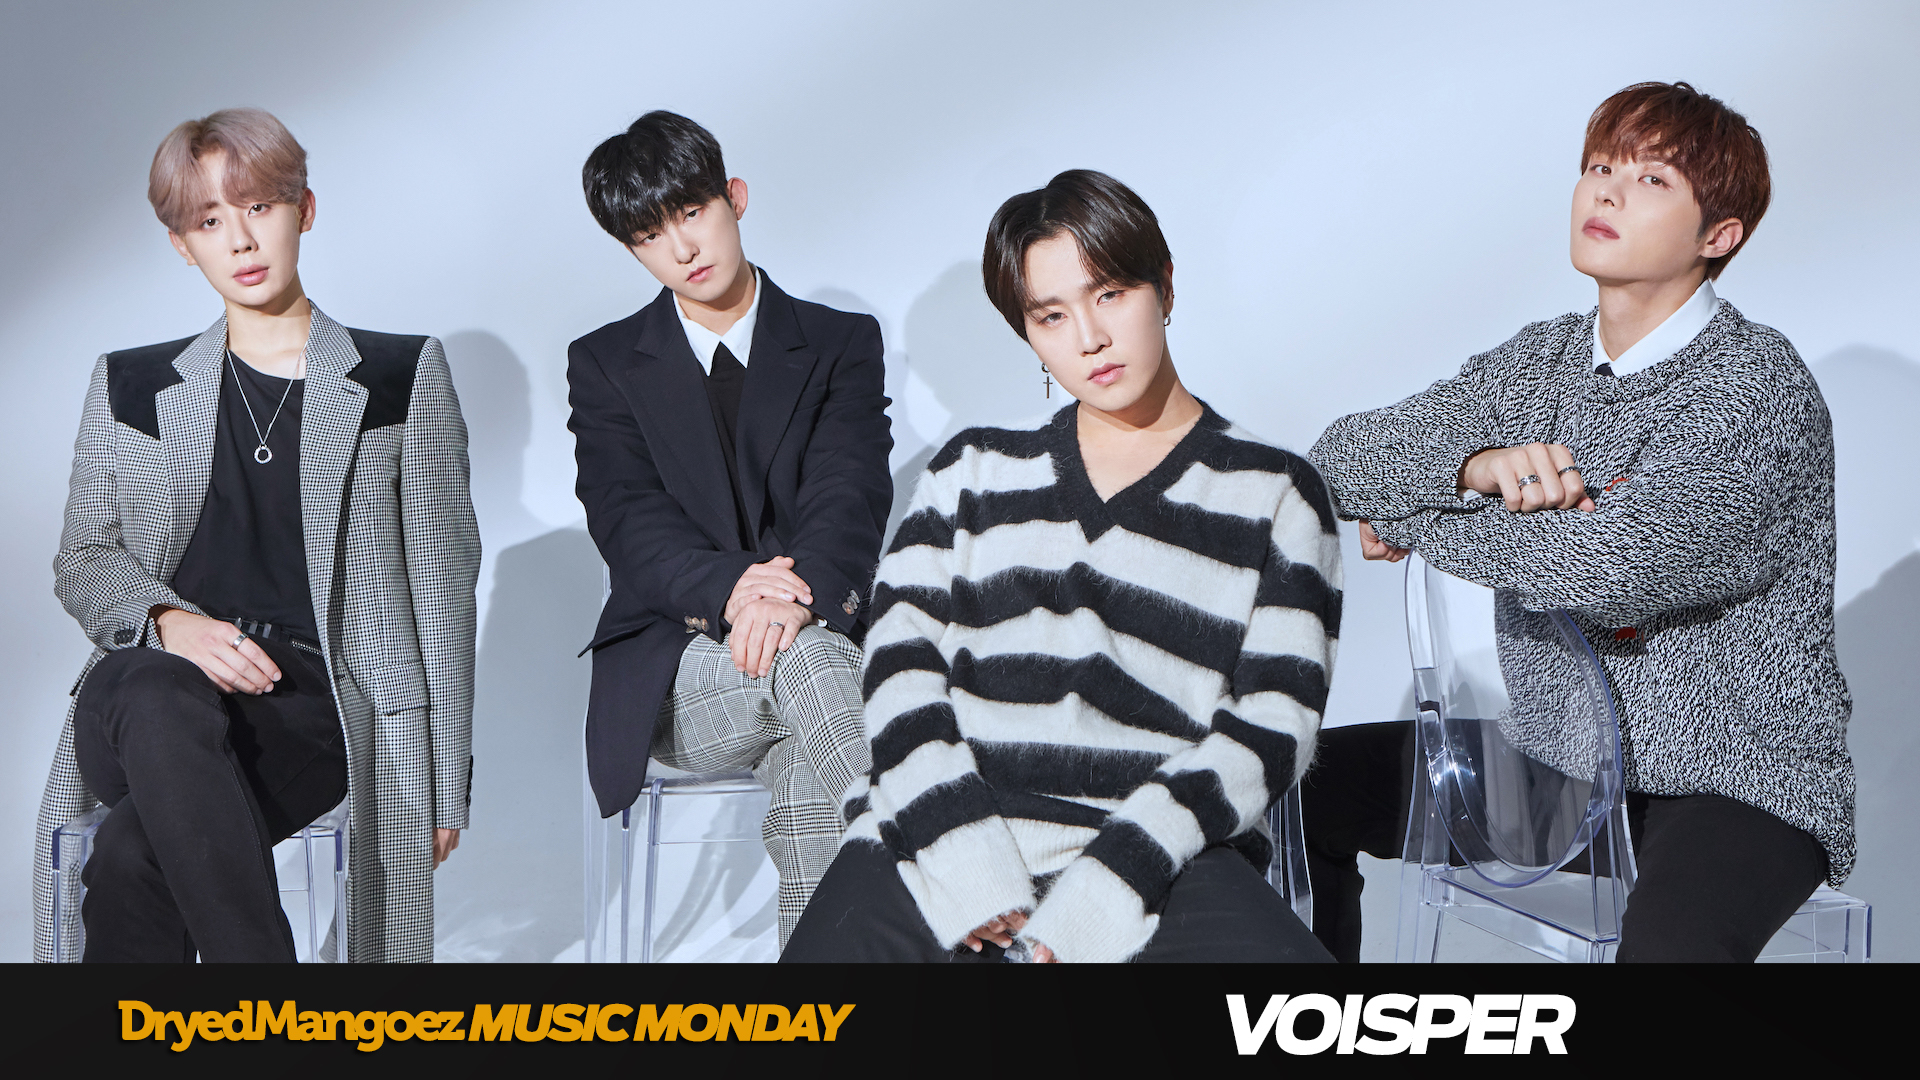 Music Monday, December 20, 2021 Special – VOISPER: Appreciating One of the Very Best Vocal Groups